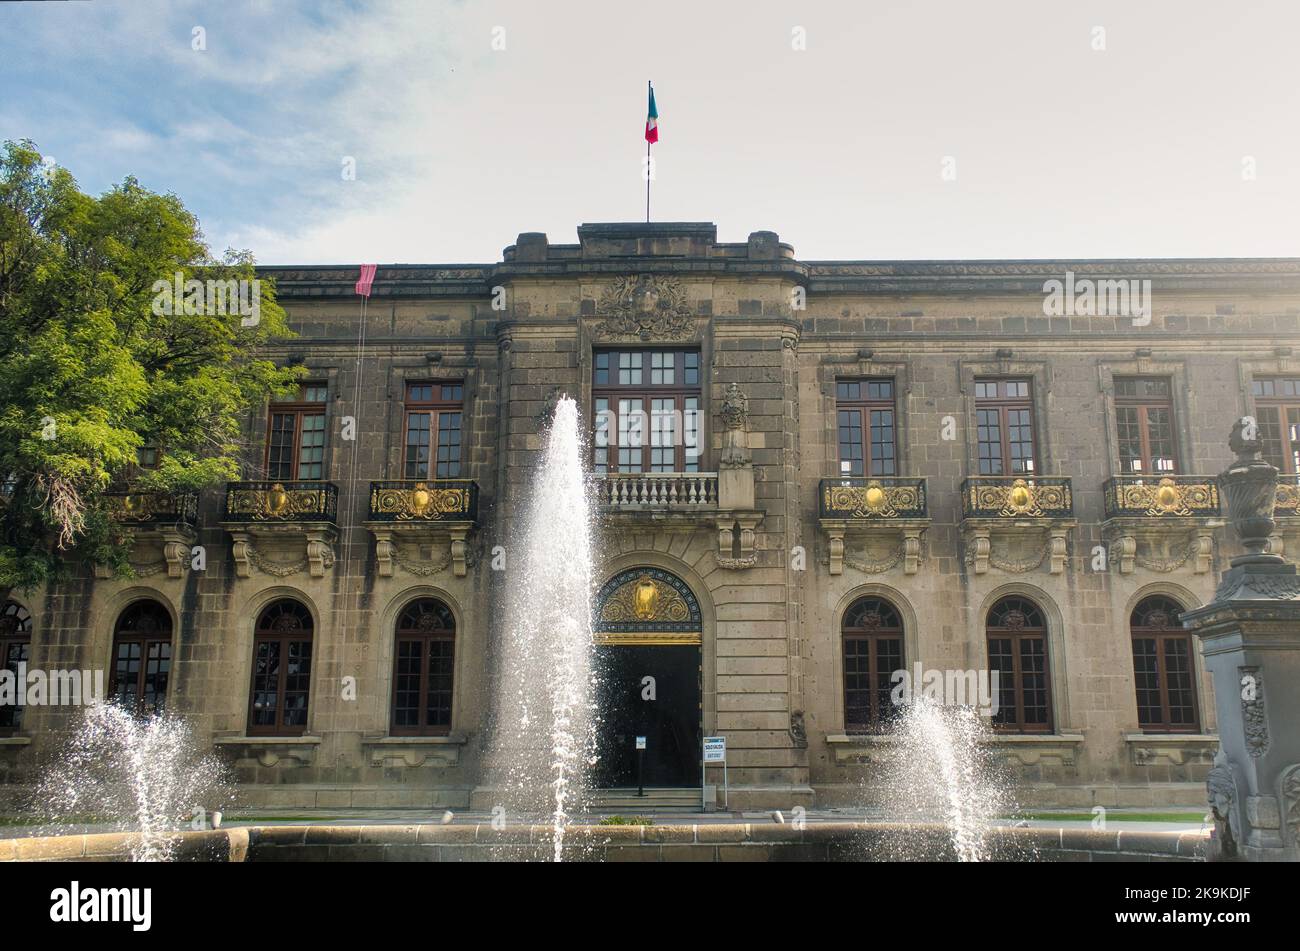 A Historical Chapultepec Castle in mexico city Stock Photo